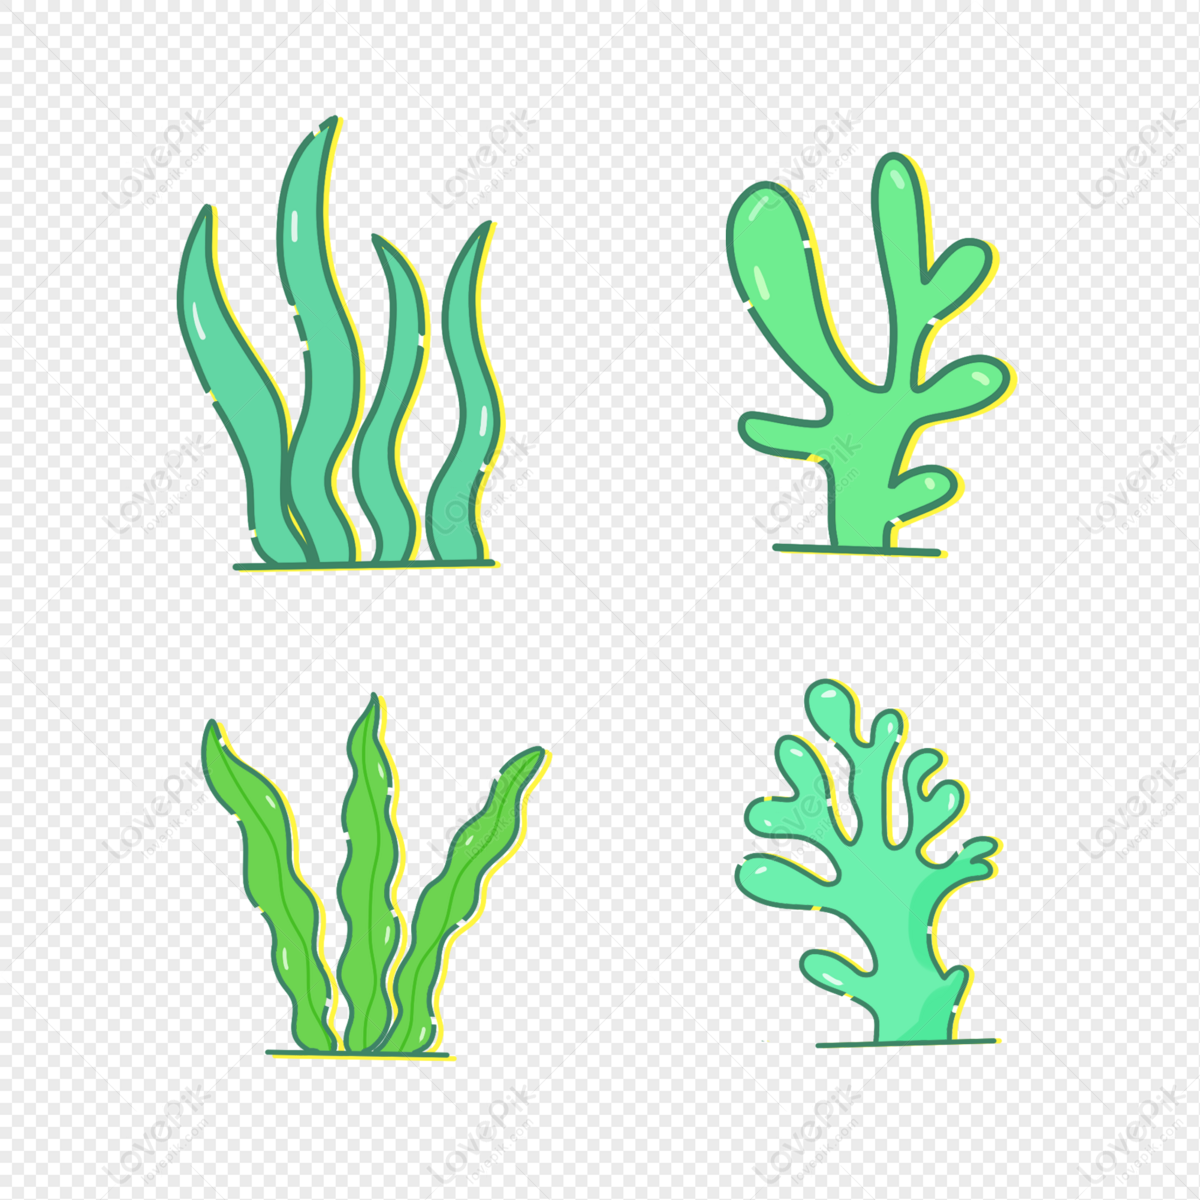 Seaweed Green PNG Image And Clipart Image For Free Download ...